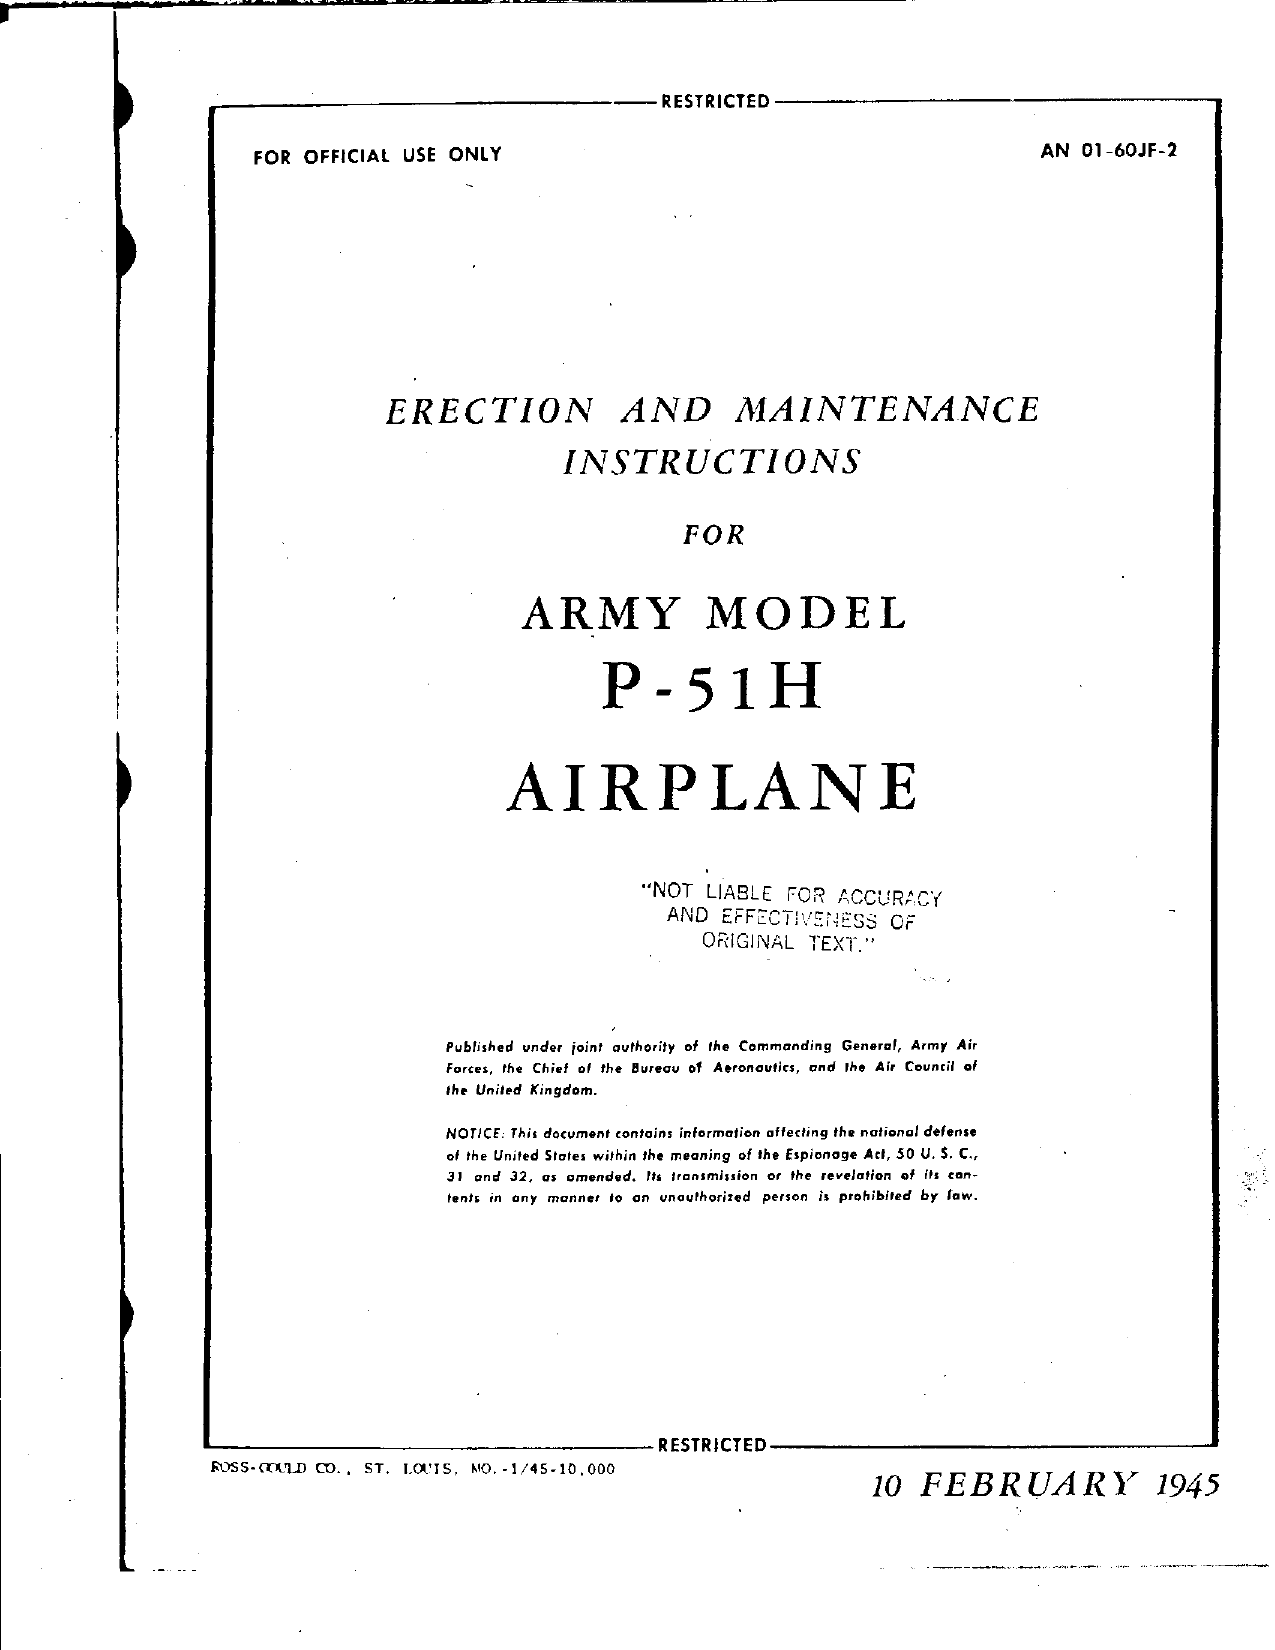 Sample page 1 from AirCorps Library document: Erection and Maintenance Instructions for P-51H Airplane